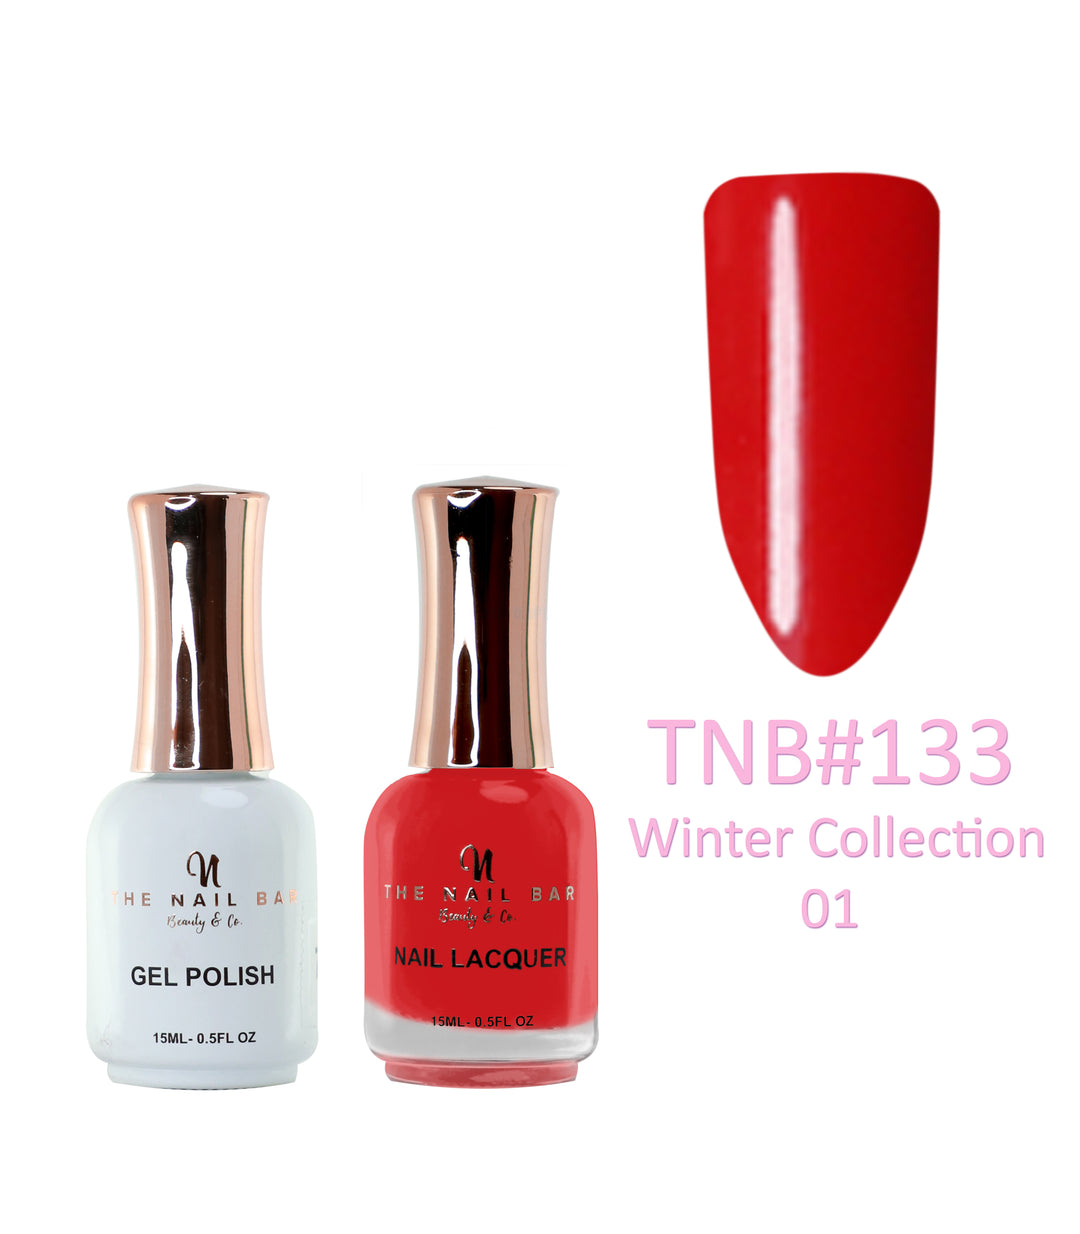 Dual Polish/Gel colour matching (15ml) - Winter collection 01